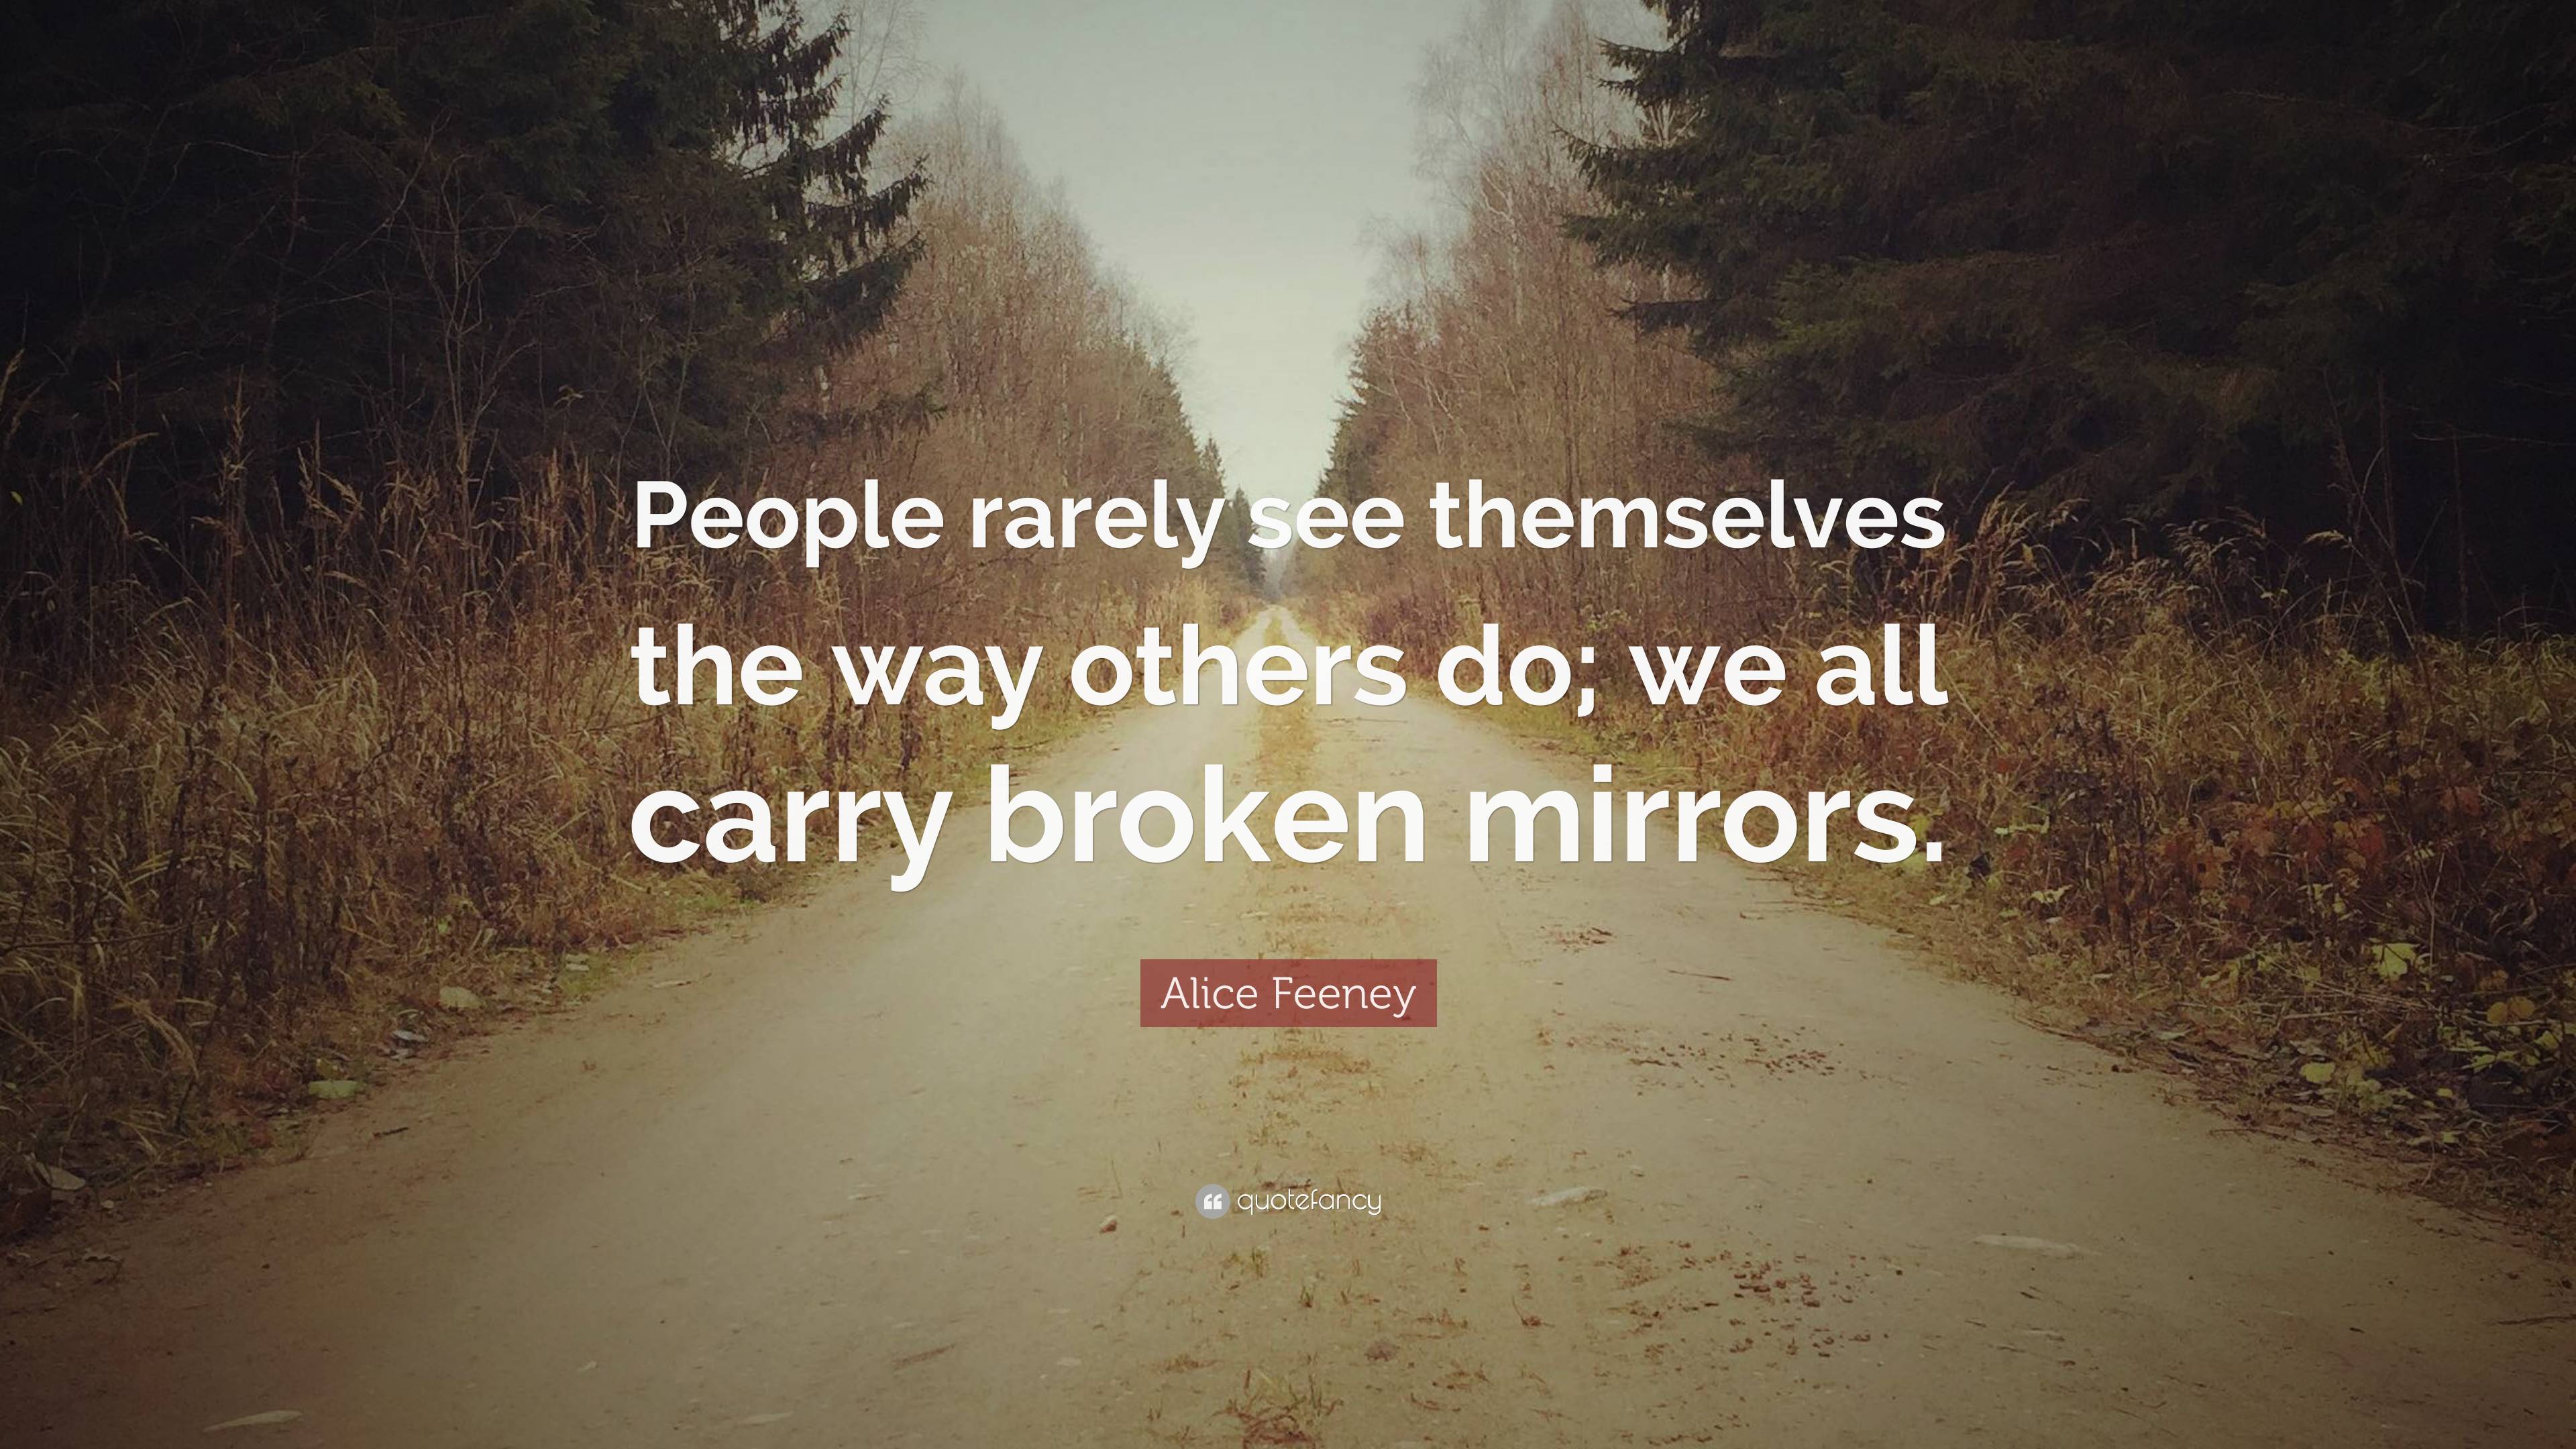 Alice Feeney Quote: “People rarely see themselves the way others do; we ...